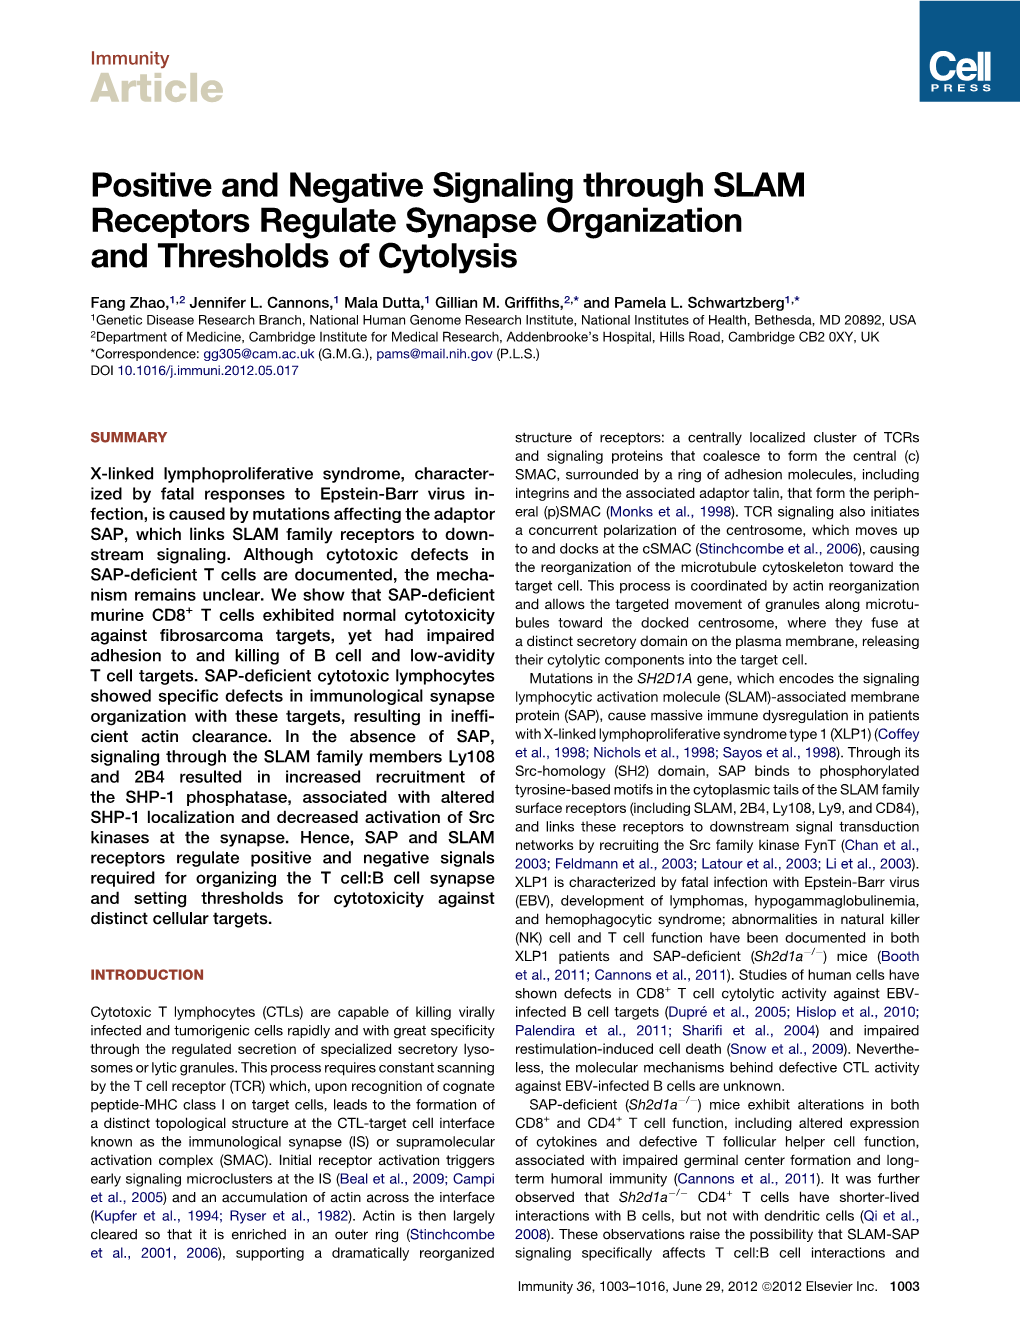 Positive and Negative Signaling Through SLAM Receptors Regulate Synapse Organization and Thresholds of Cytolysis